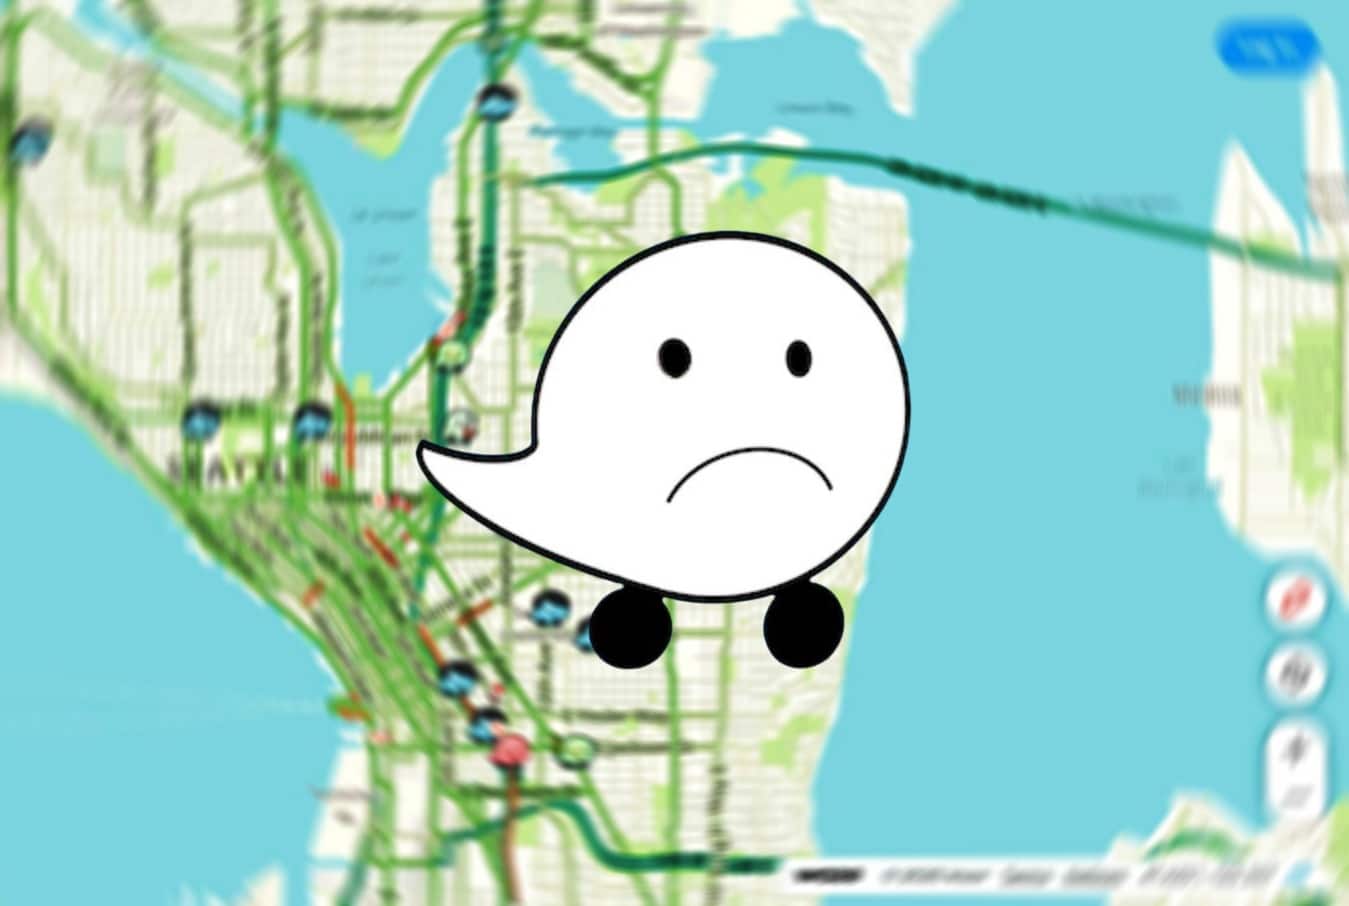 Waze app vulnerability allowed users real-time location tracking